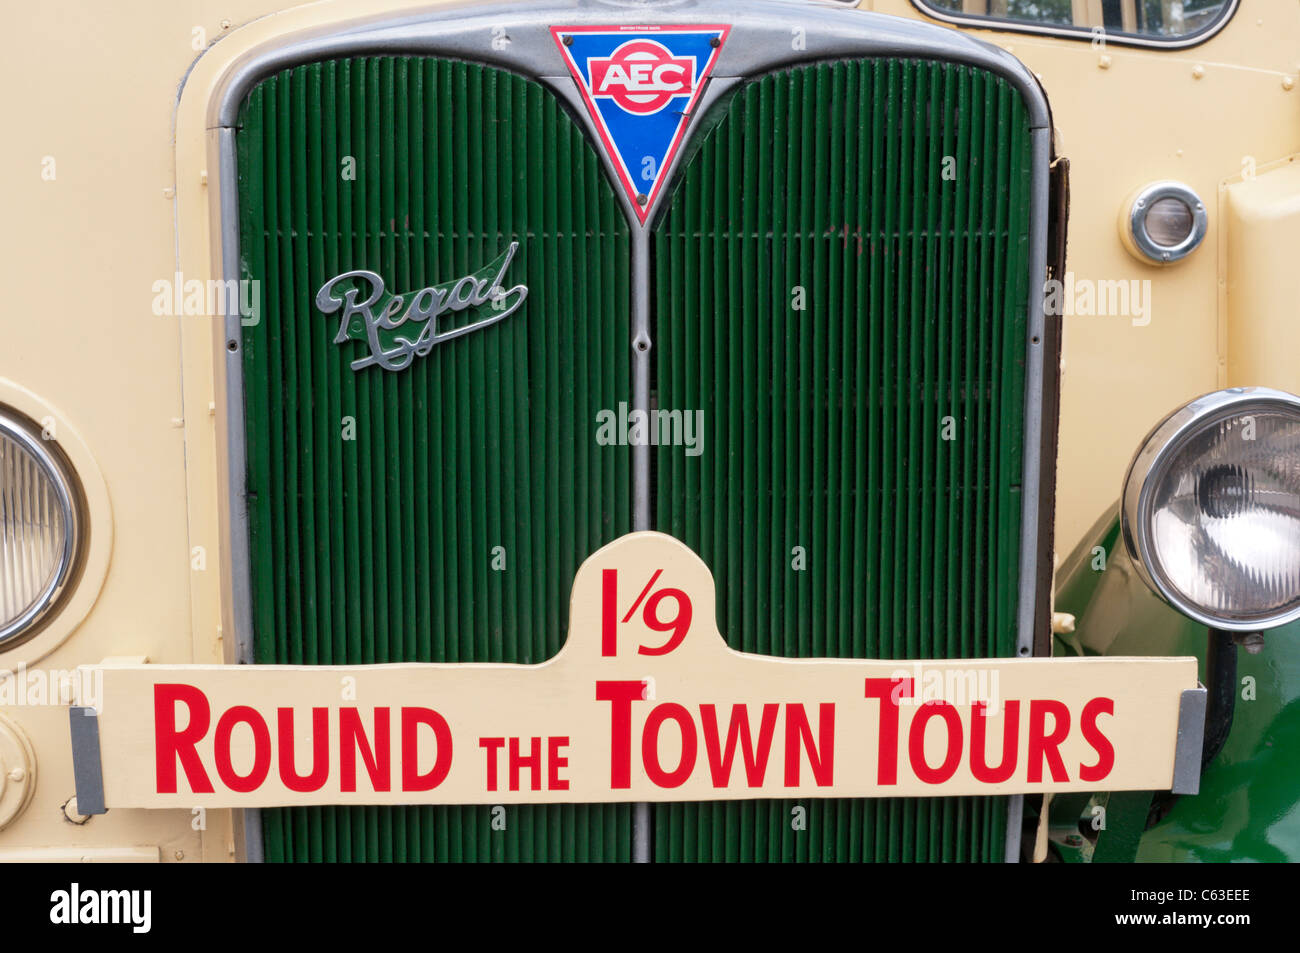 Sign for Round The Town Tours on the front of an old bus Stock Photo